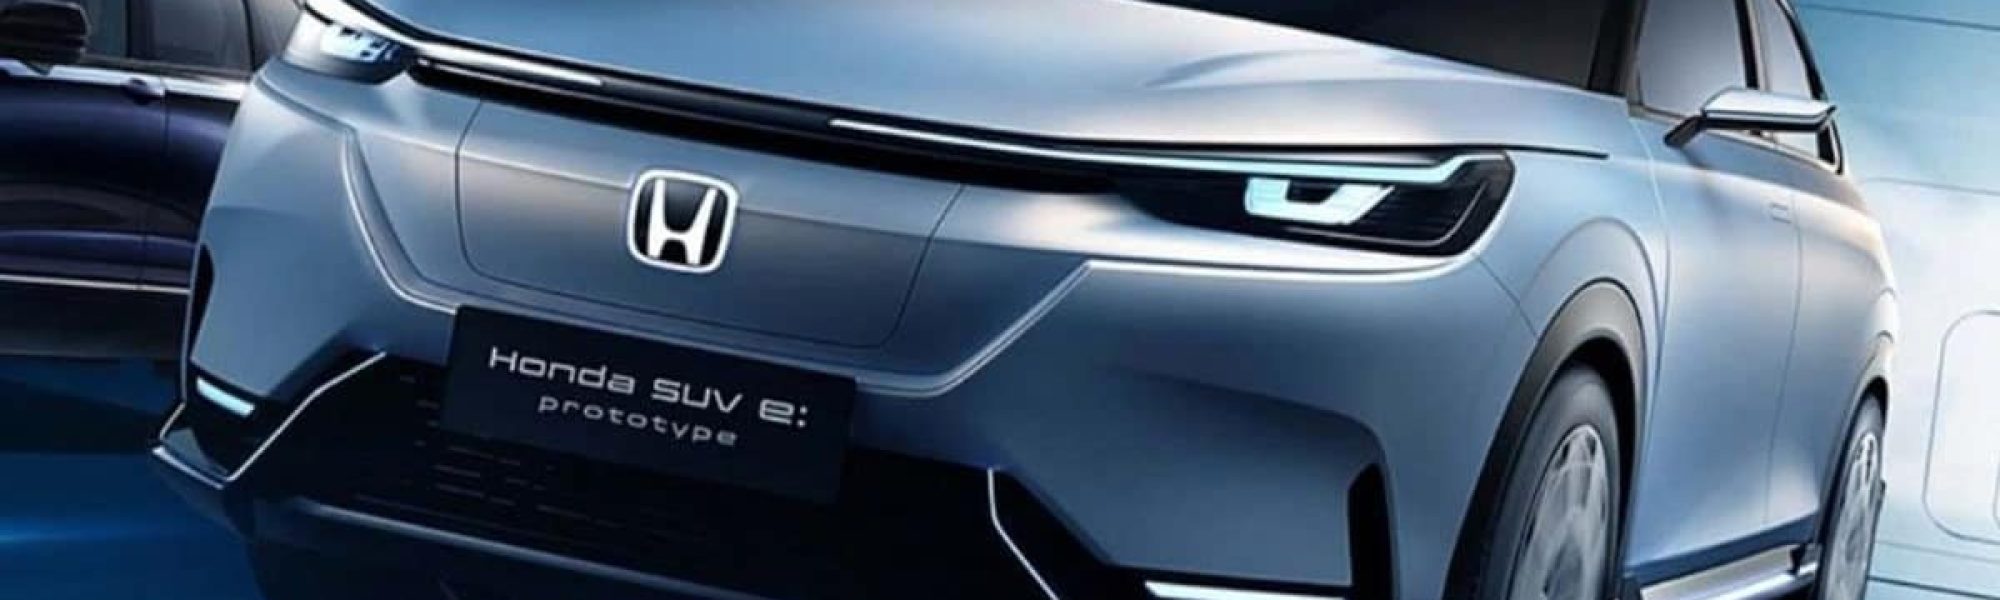 Honda takes the wraps off the Prologue, company's first electric SUV